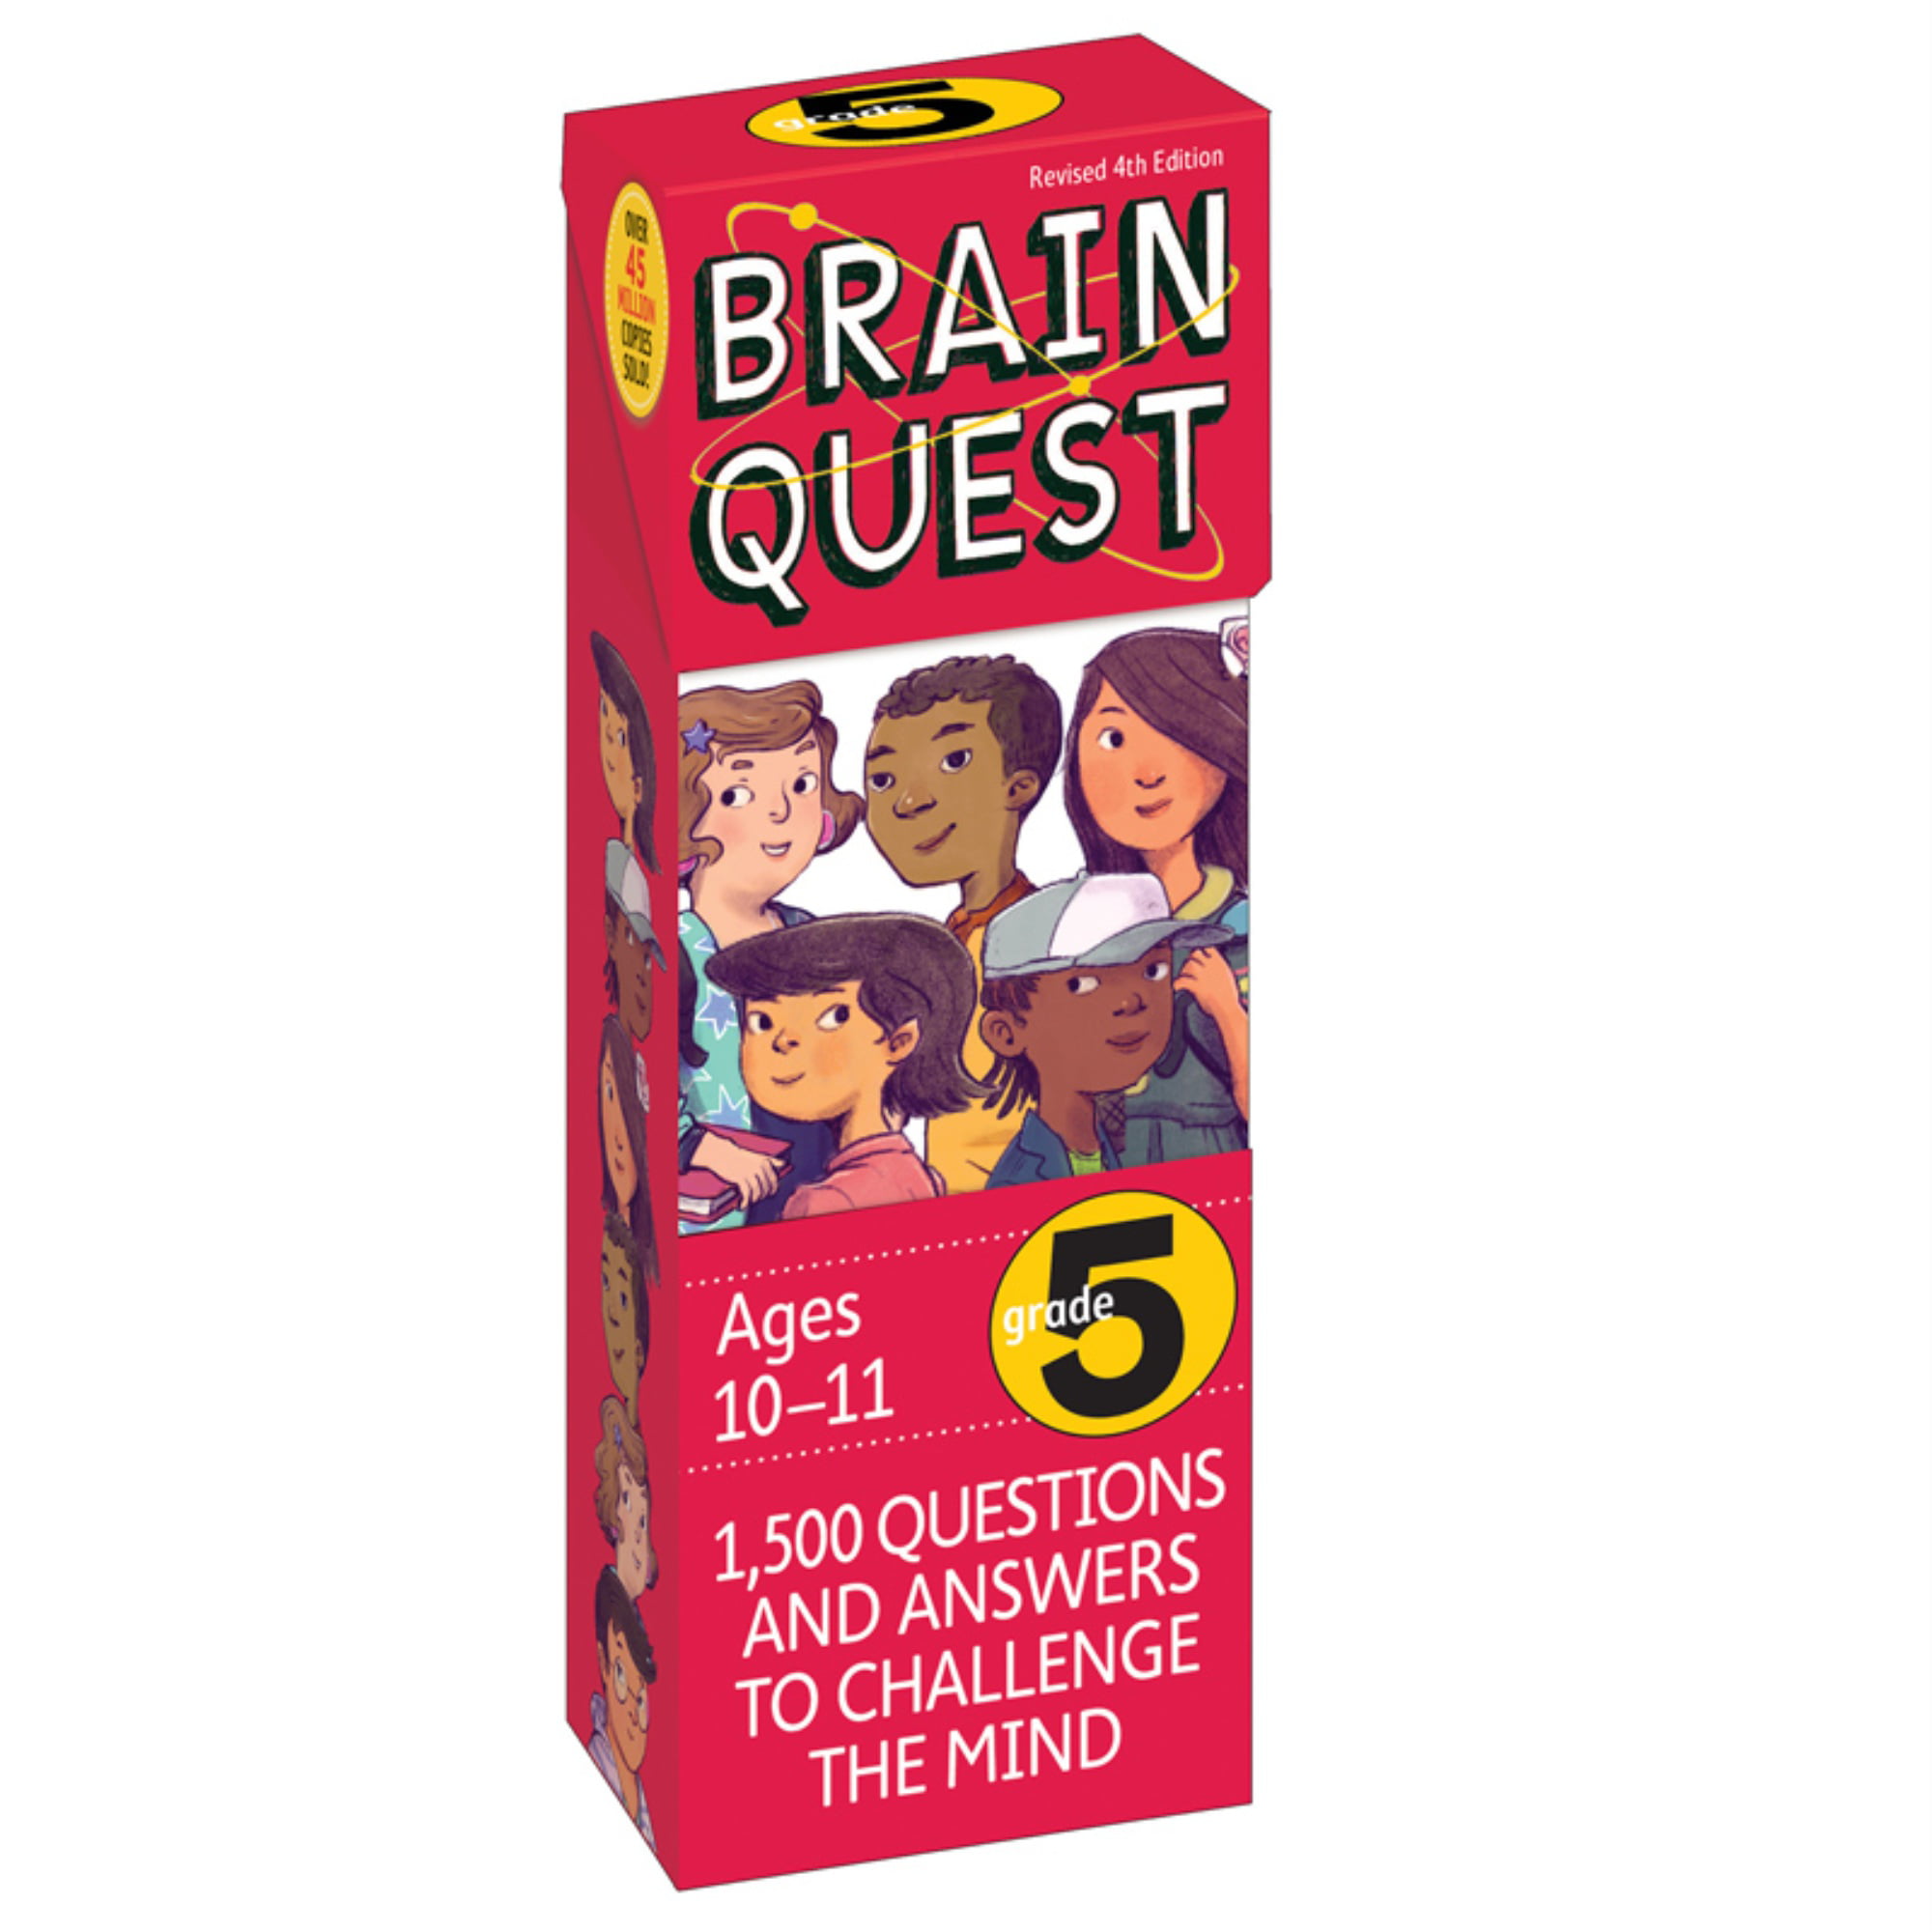 Brain Quest Decks Ser.: Brain Quest Grade 4 2012, Book, Other for sale online Revised 4th Edition : 1,500 Questions and Answers to Challenge the Mind by Susan Bishay and Chris Welles Feder 